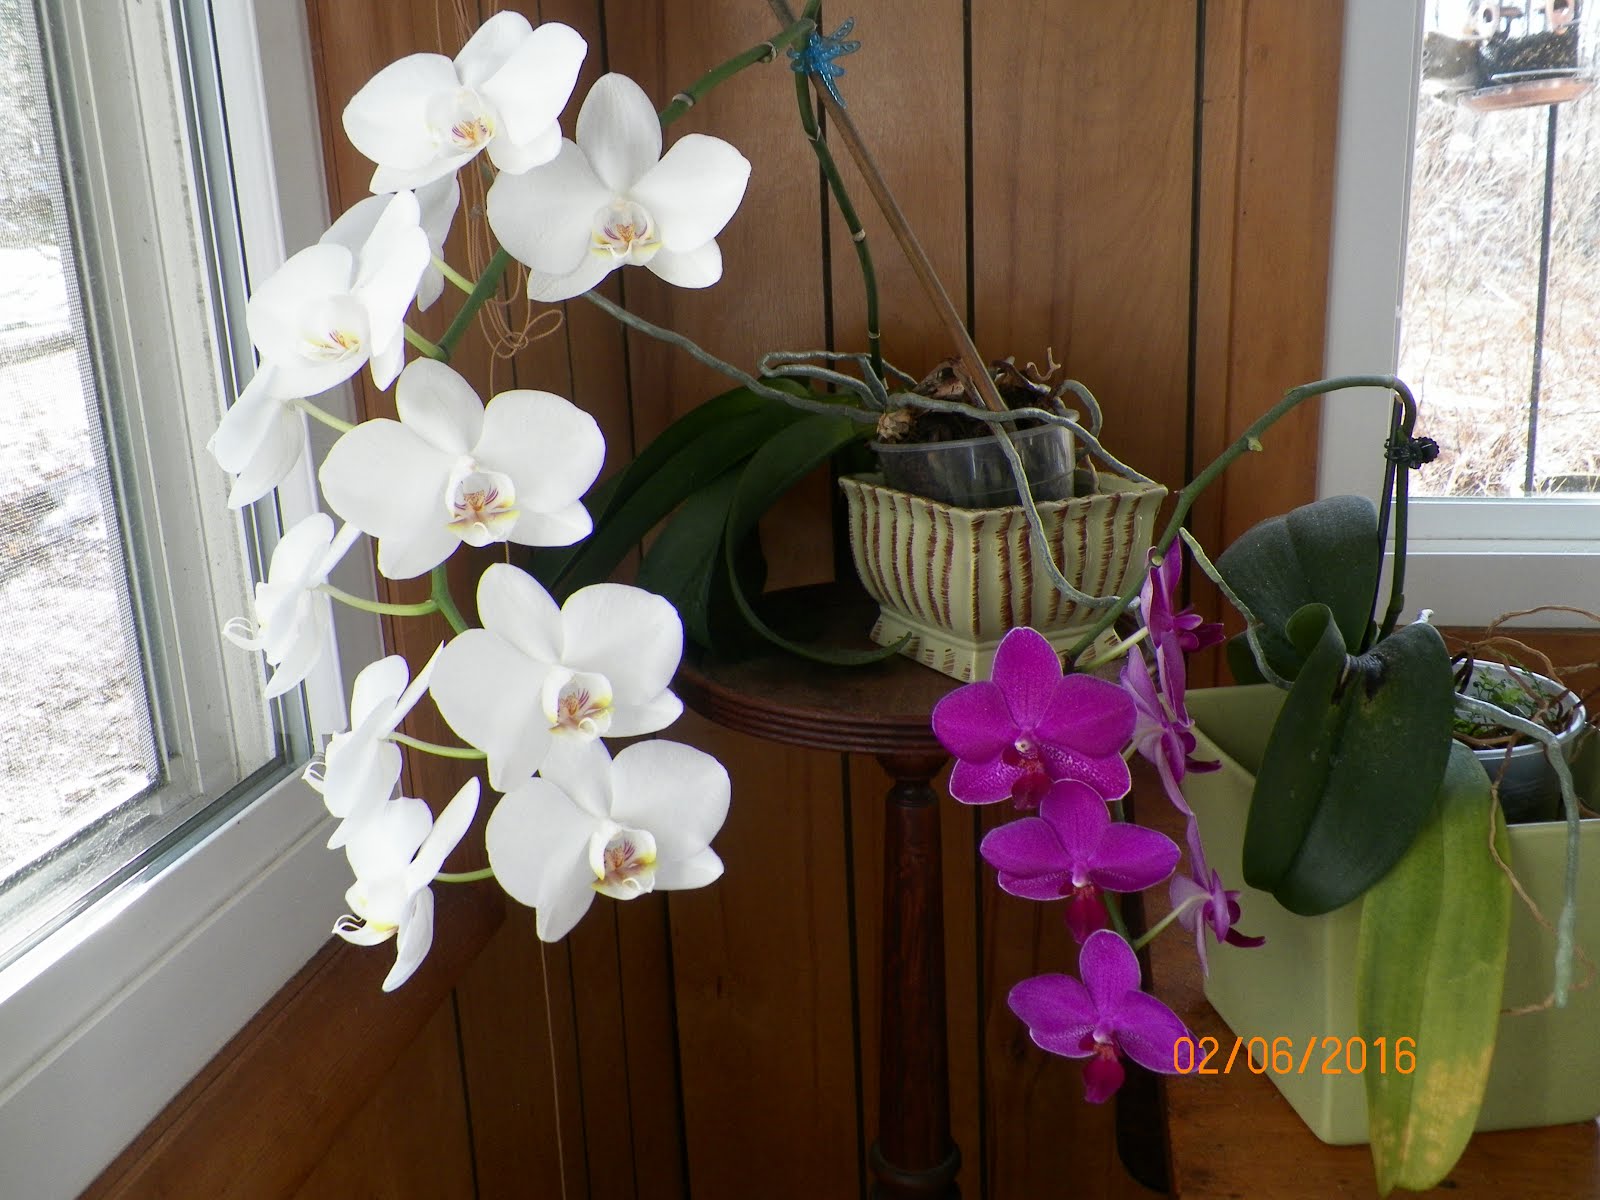 MOM'S ORCHIDS